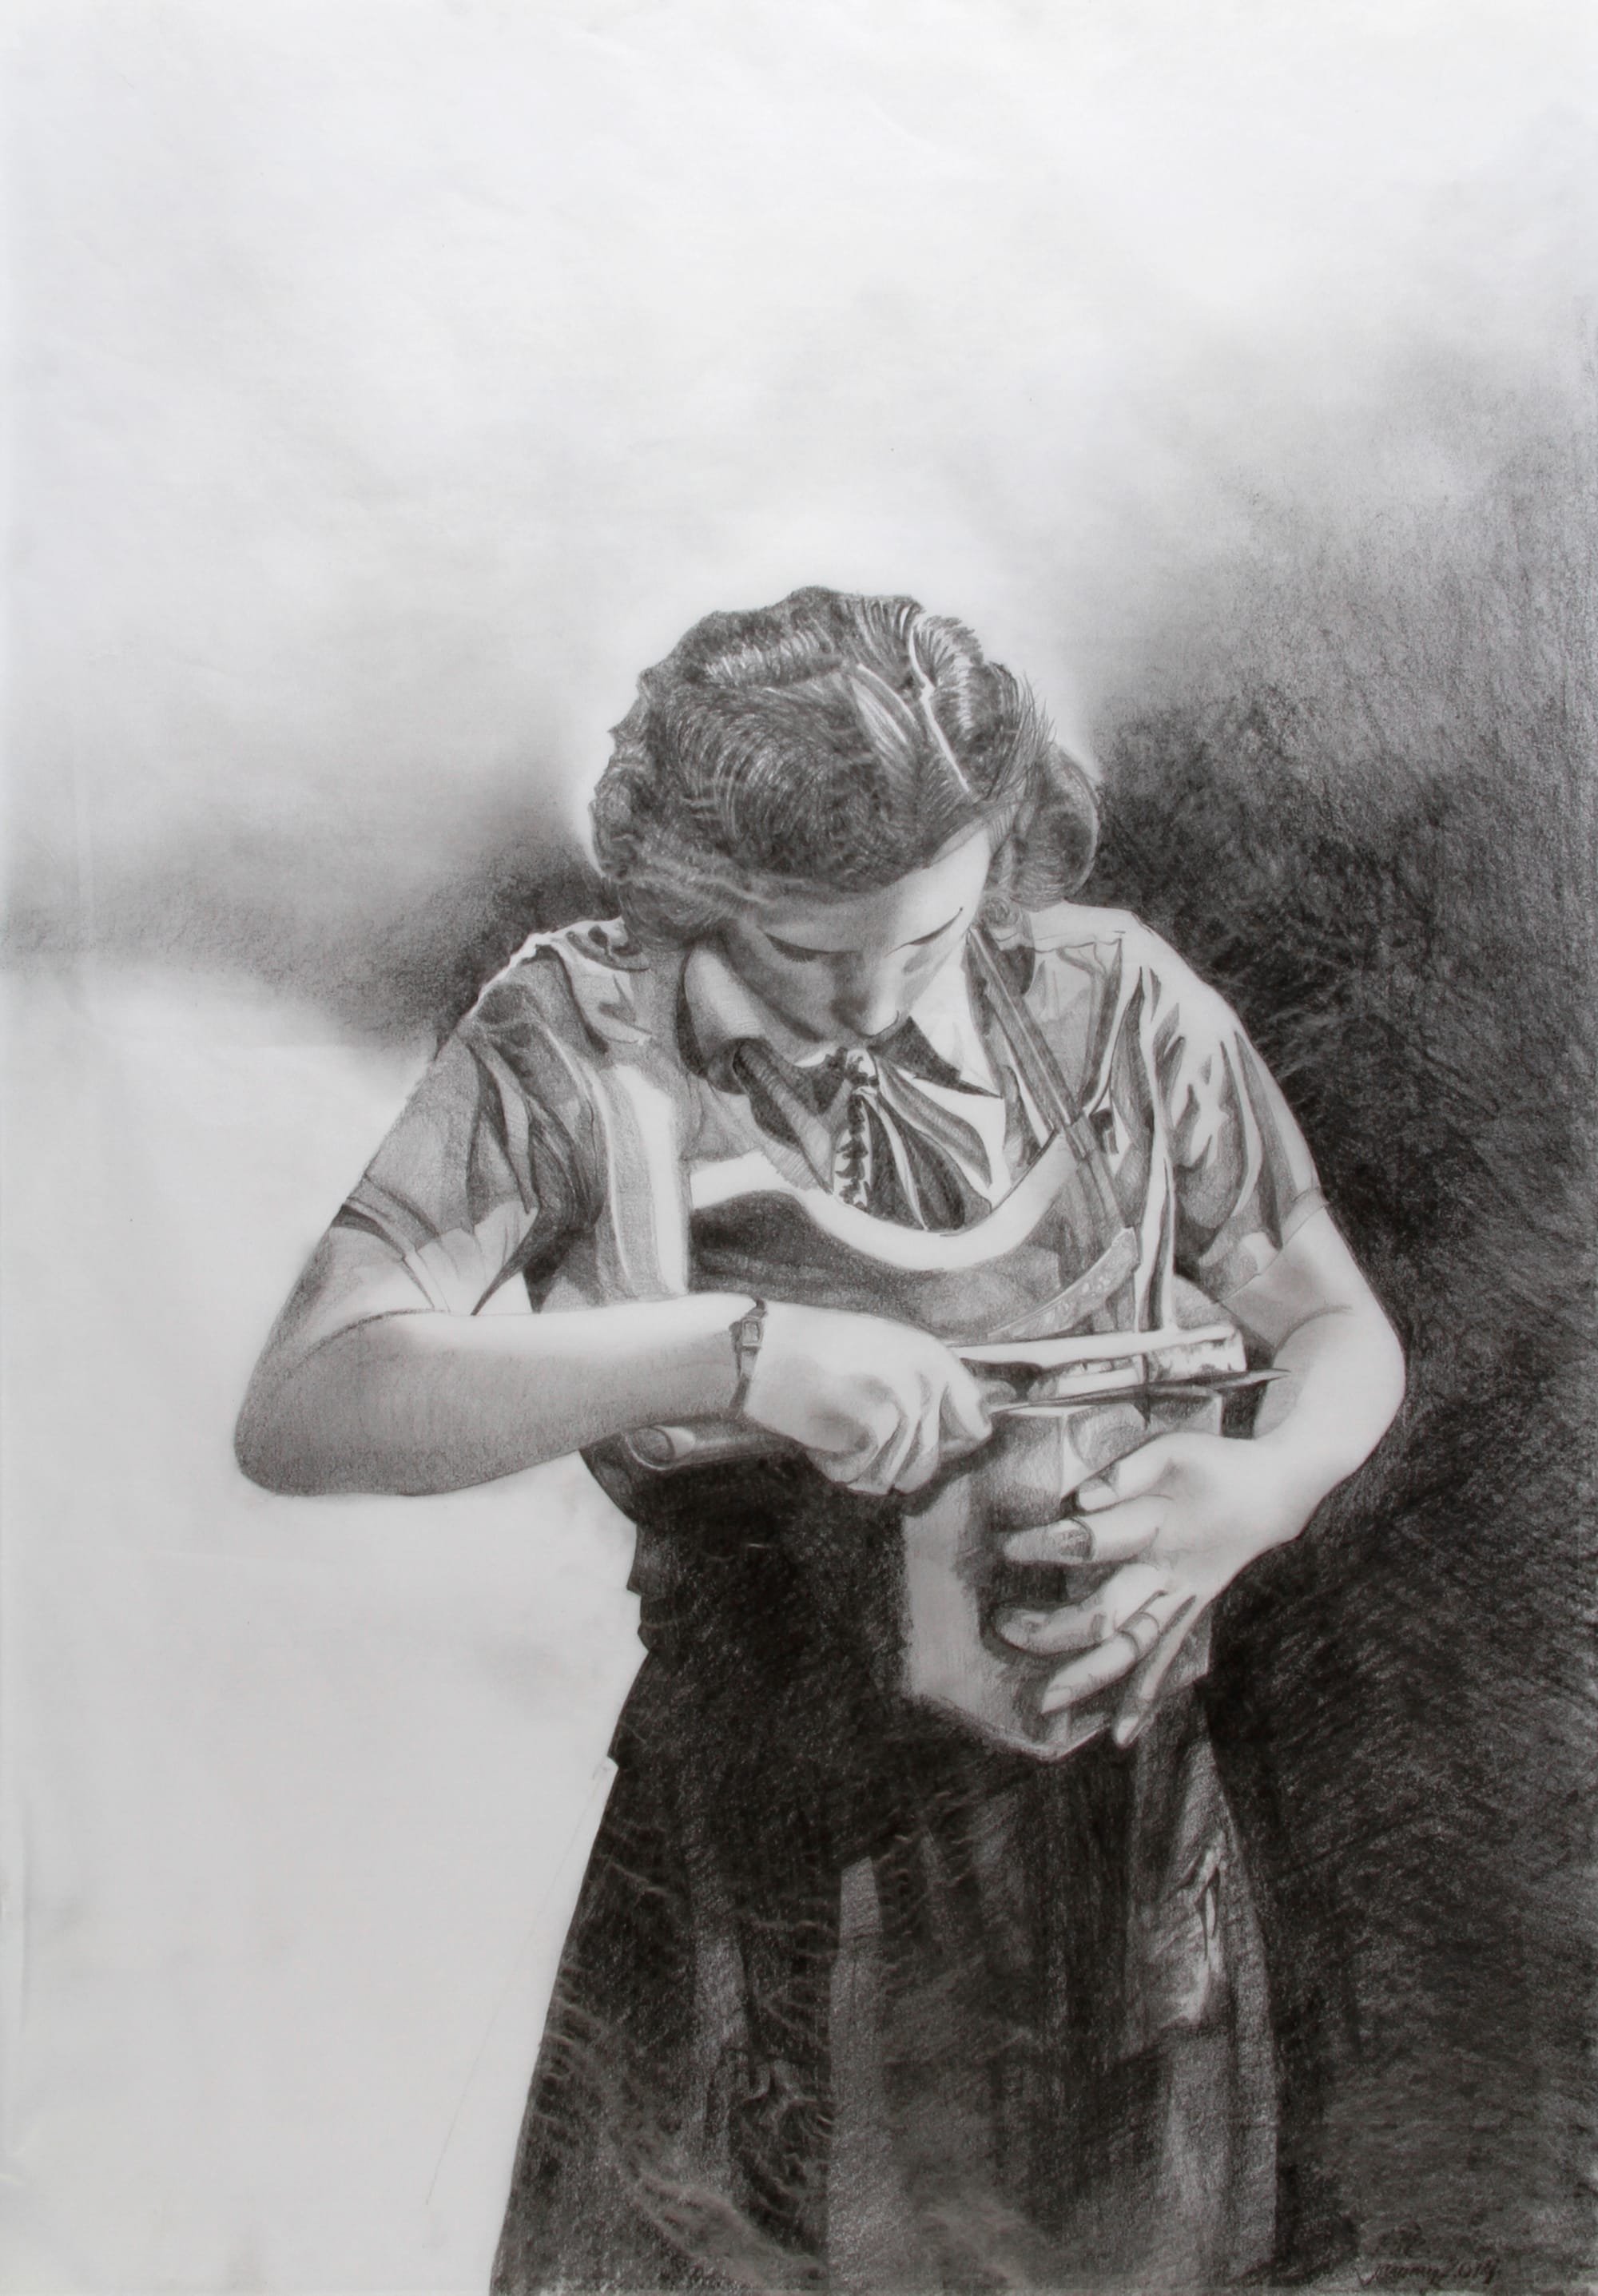 Woman cutting bread, Pencil on Tissue Paper,  H59 x W42cms, exhibited in solo show in Hannover, Germany